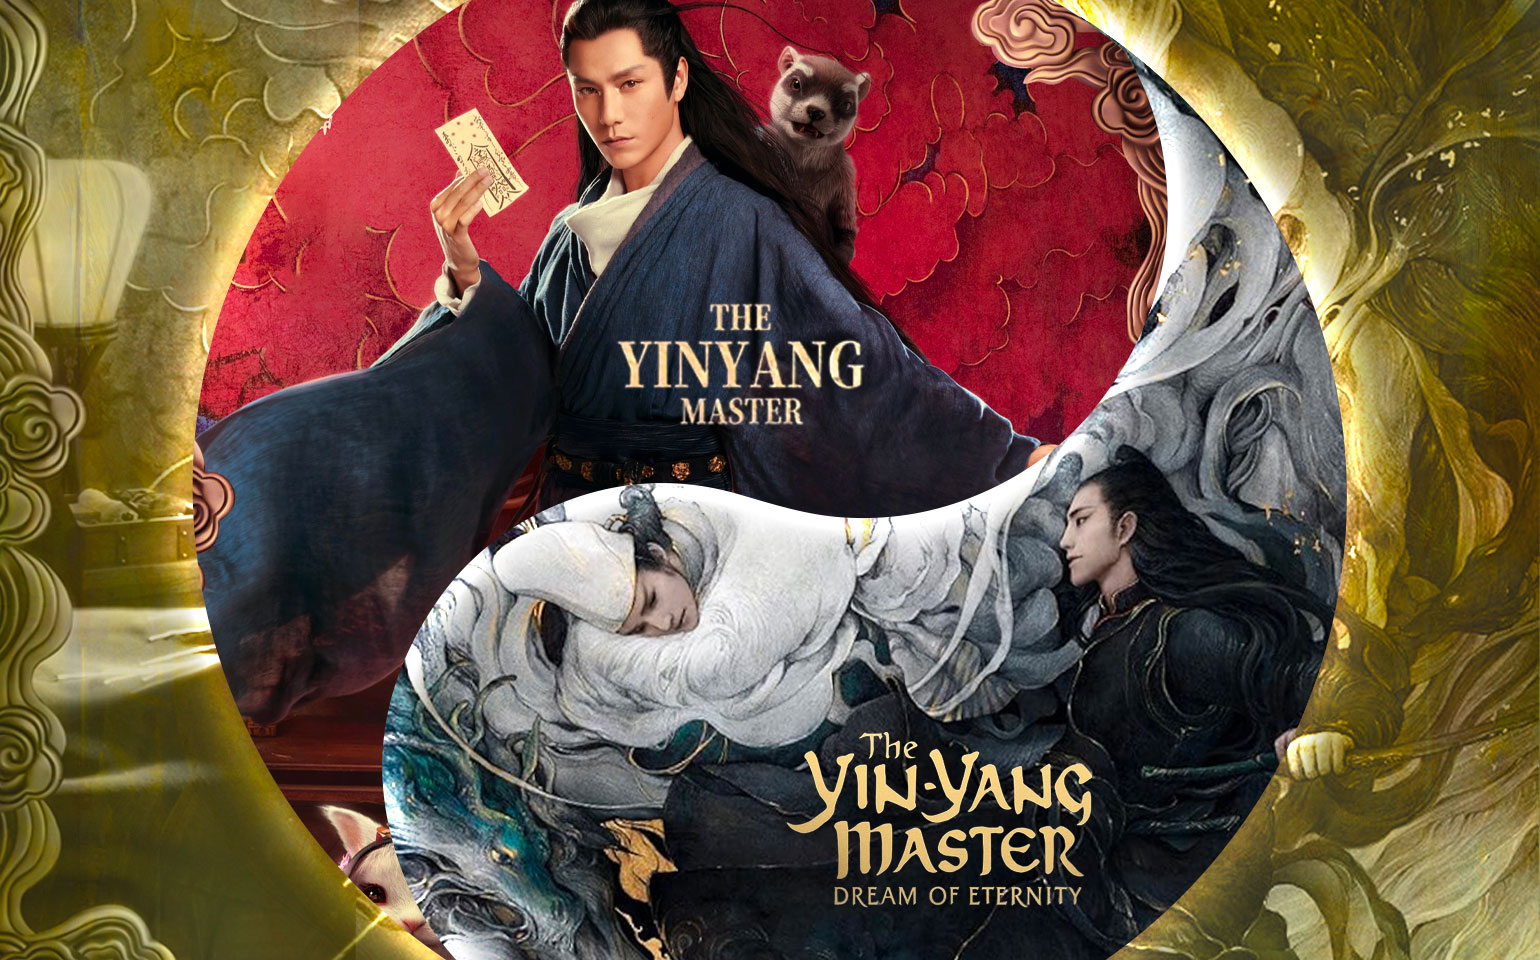 The two versions of The Yin-Yang Master are shown.